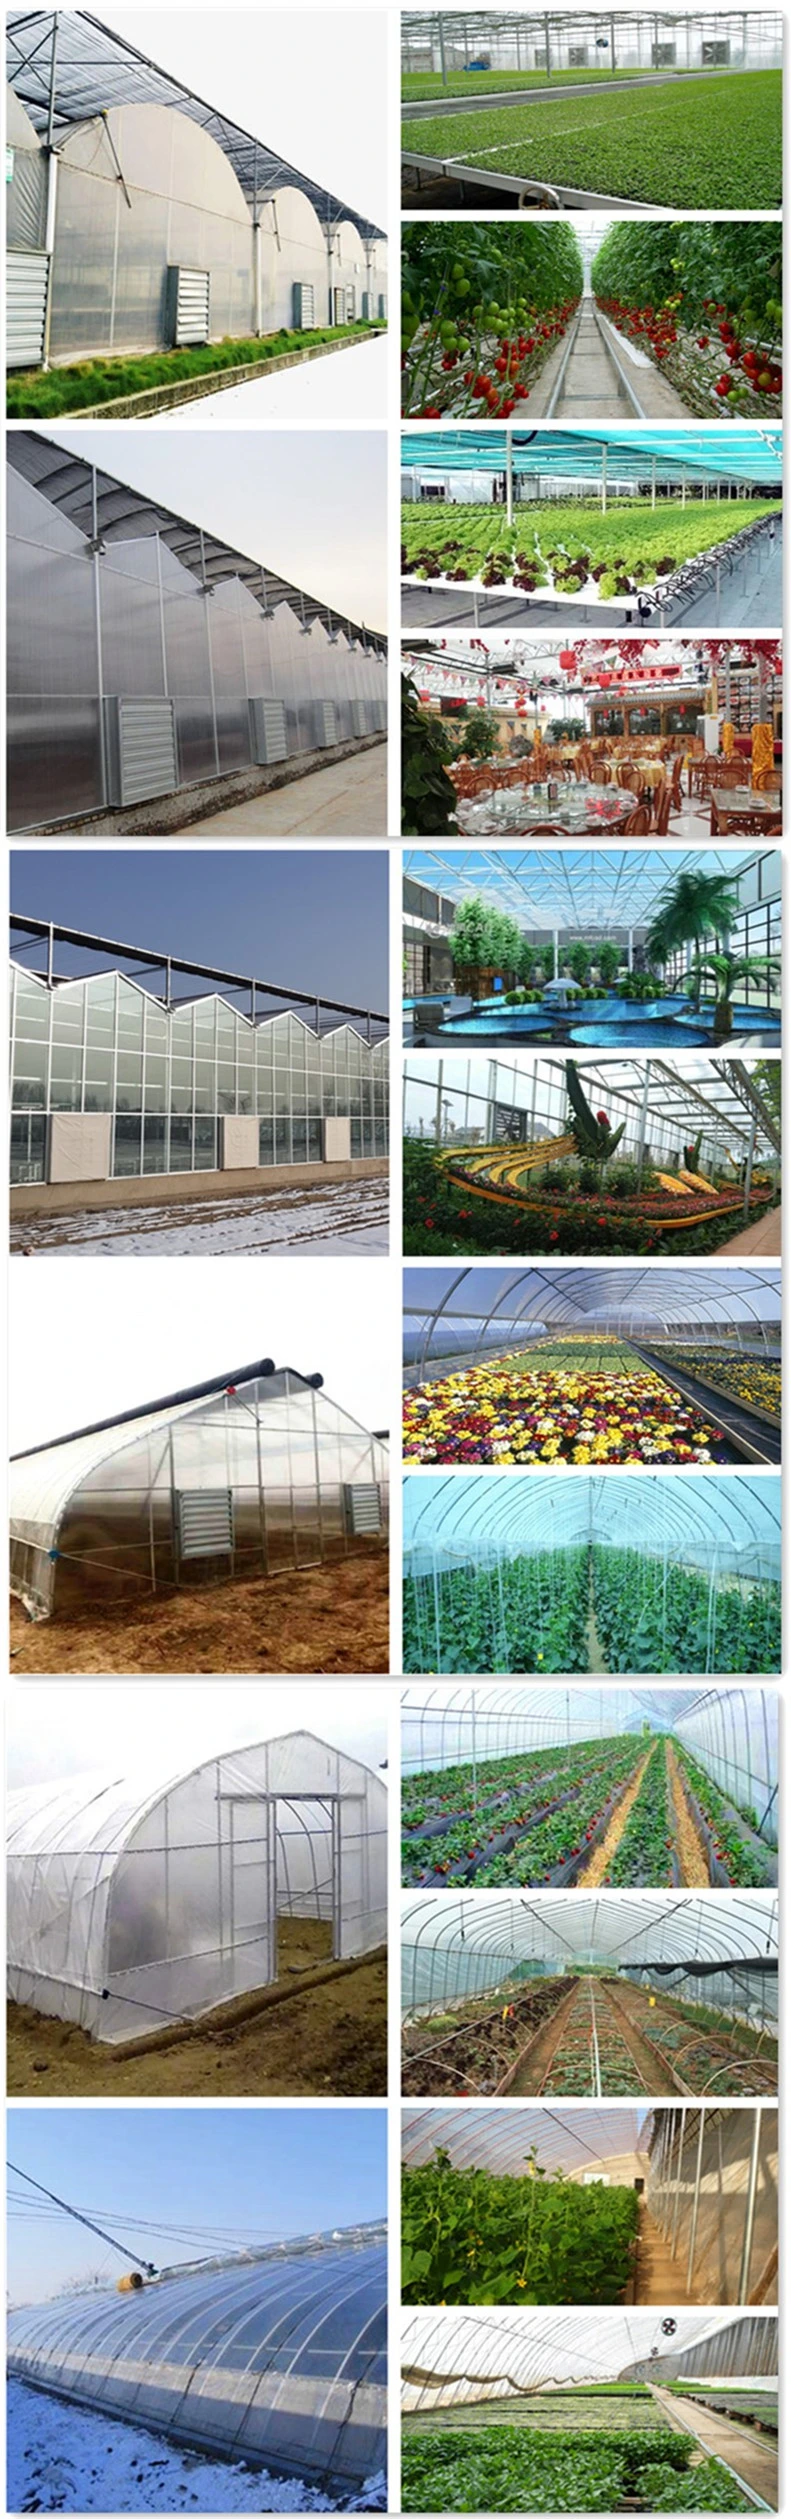 Modern Design Intelligent Greenhouse Covered with Glass for Seed Breeding/Exhibition/Planting/Eco Restaurant